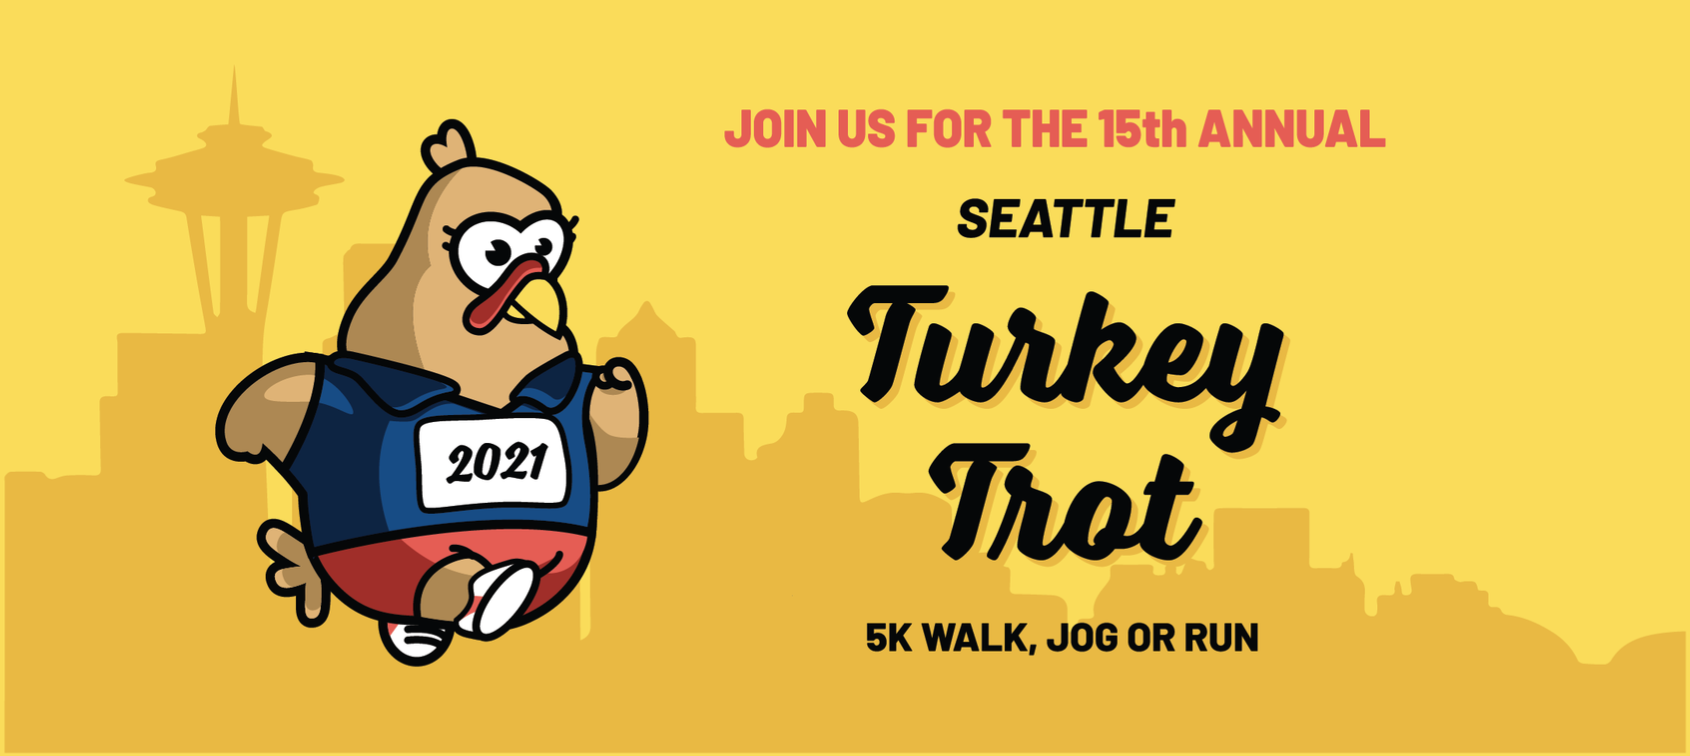 Seattle Turkey Trot will support efforts to fight hunger and poverty in